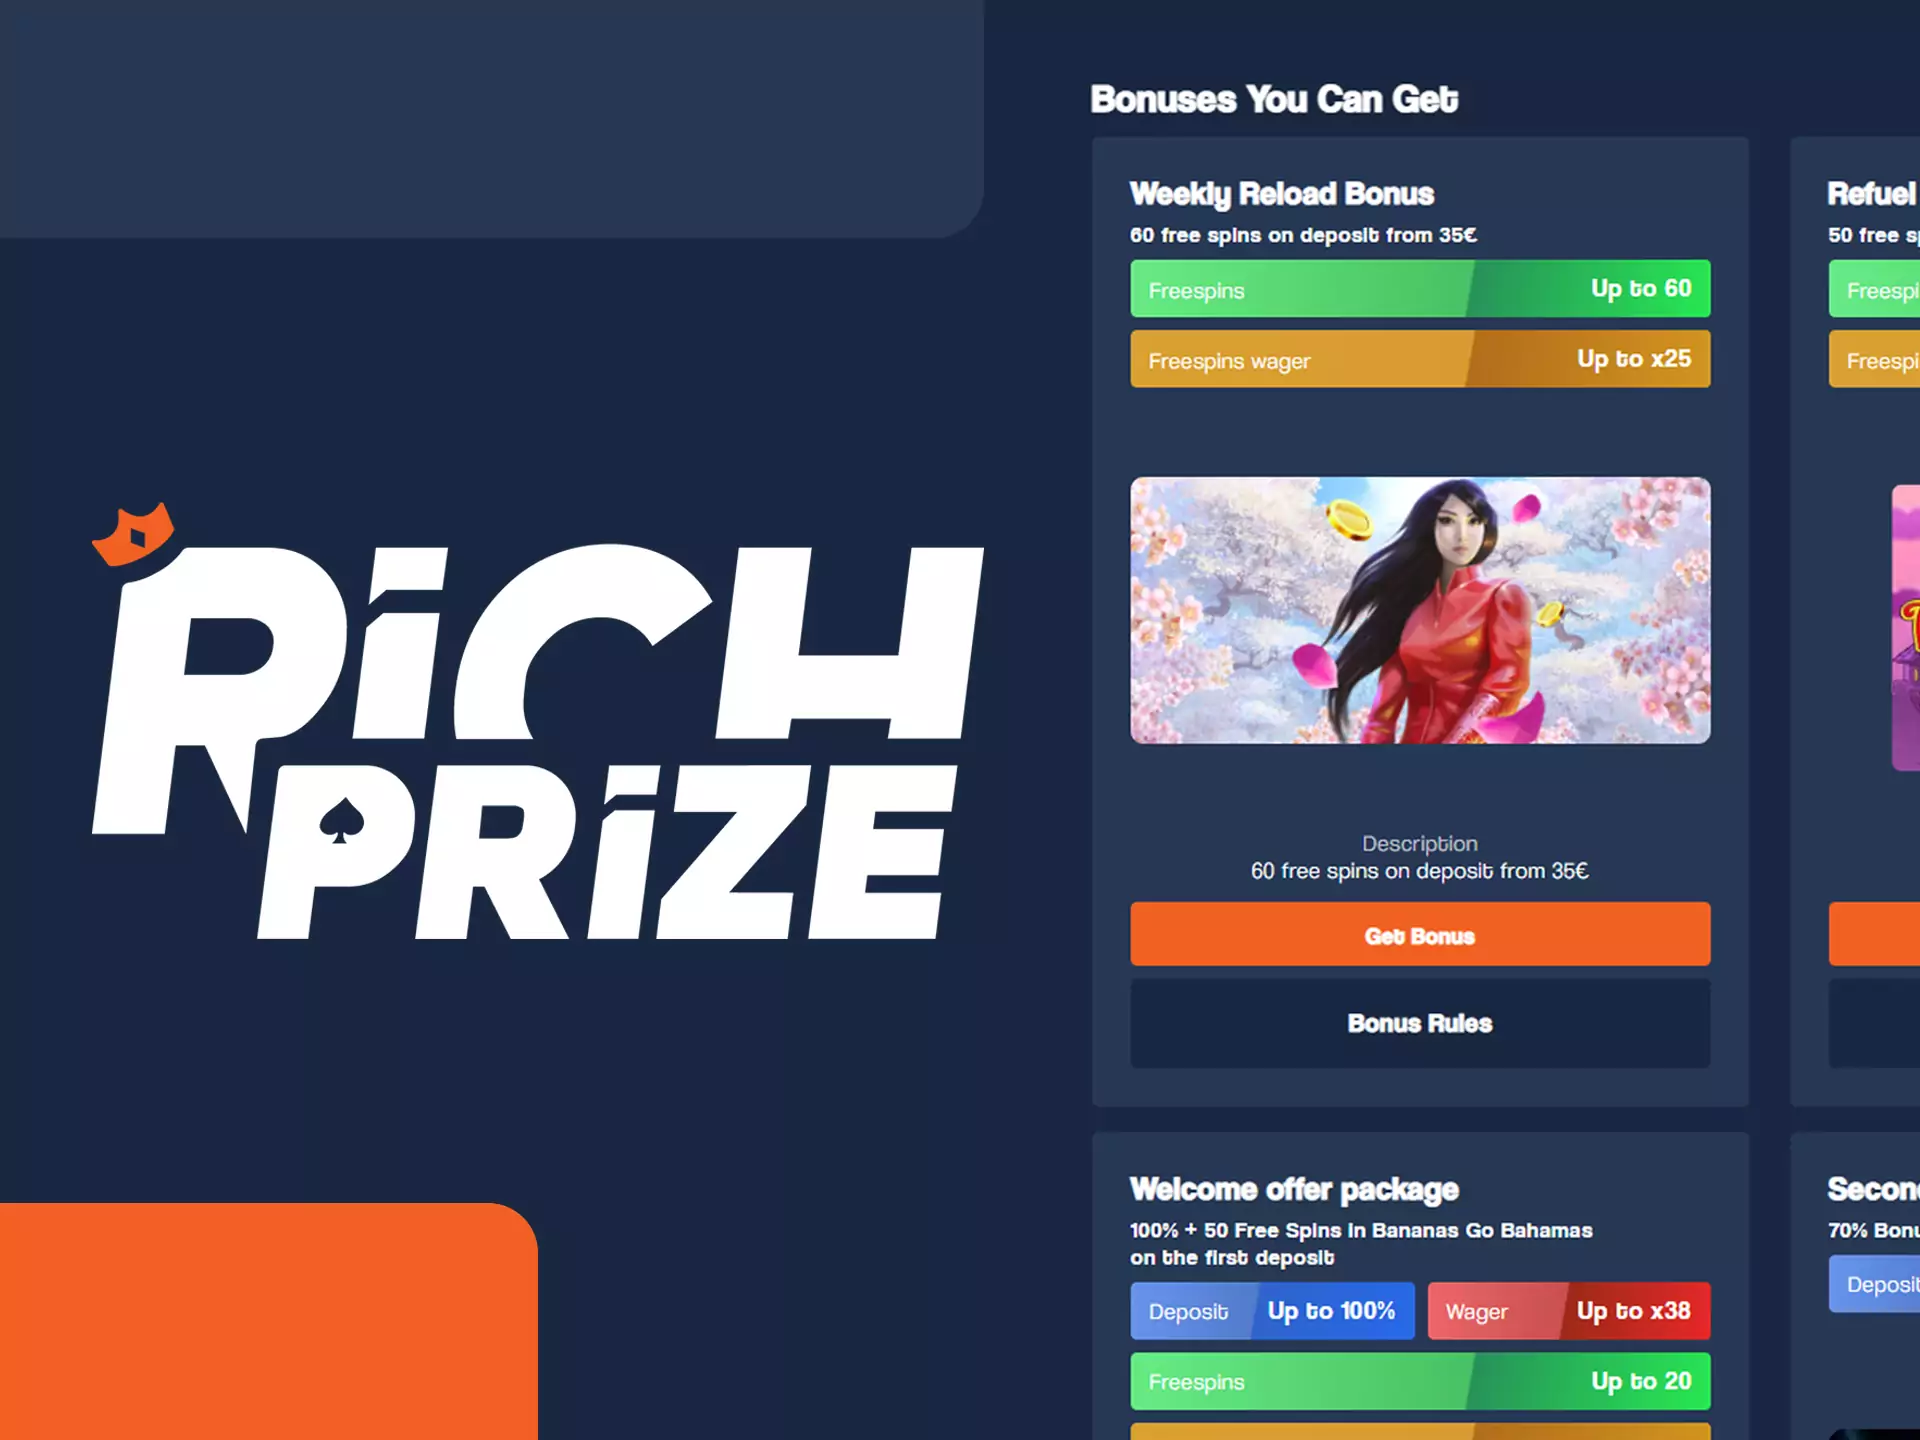 Check all of the RichPrize promotions to get maximum profit.